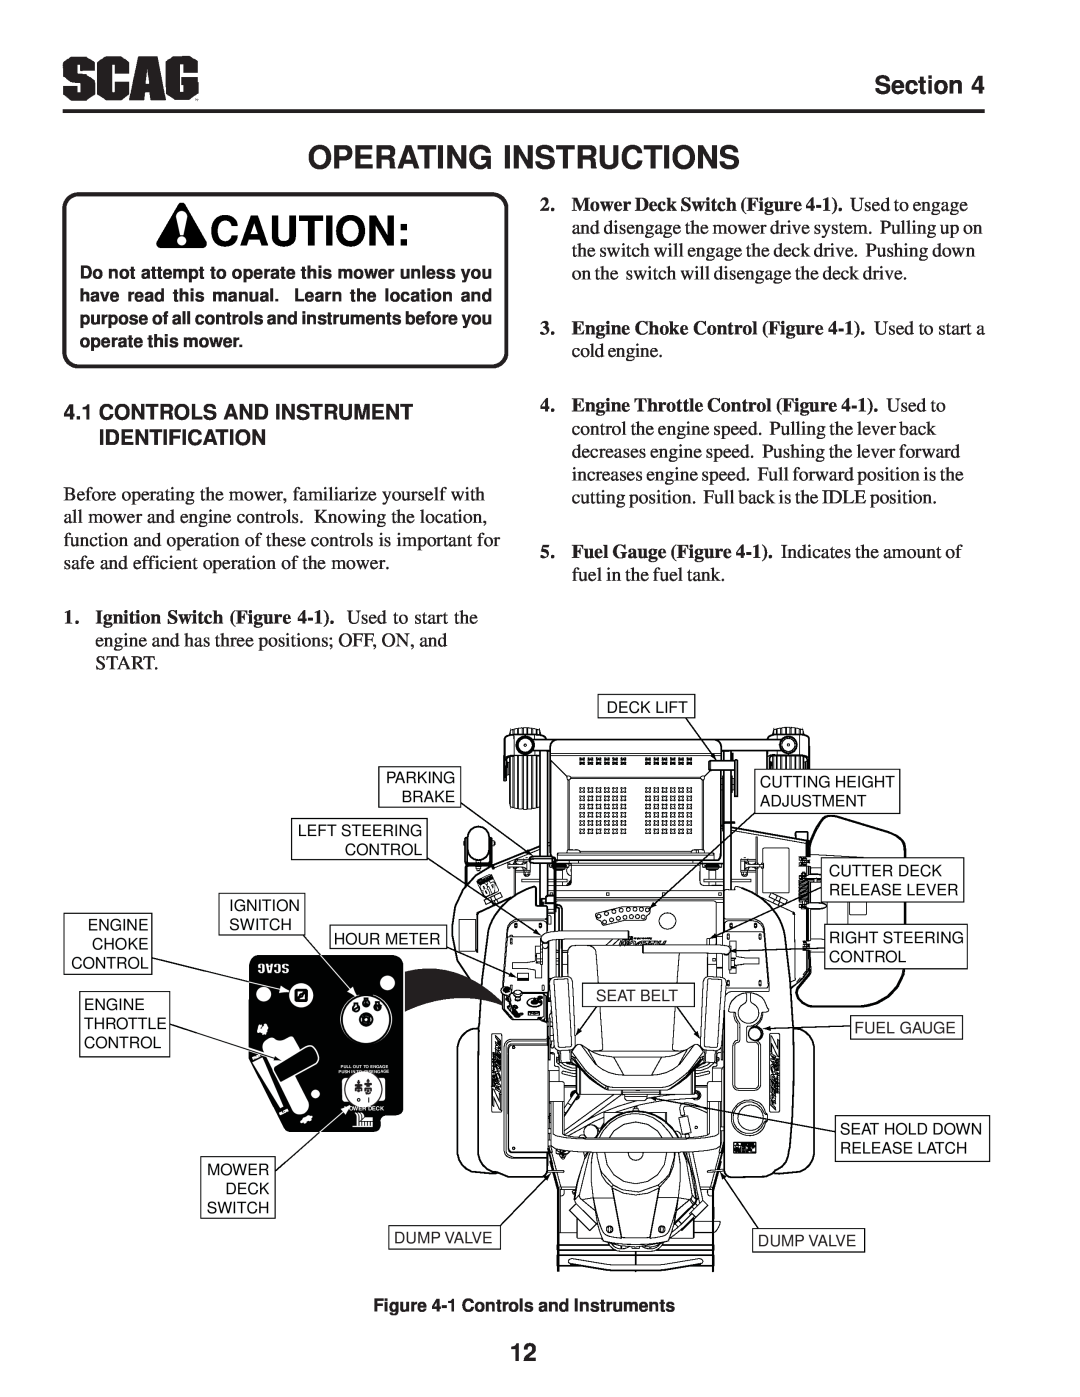 Scag Power Equipment SFZ manual Operating Instructions, Controls And Instrument Identification 